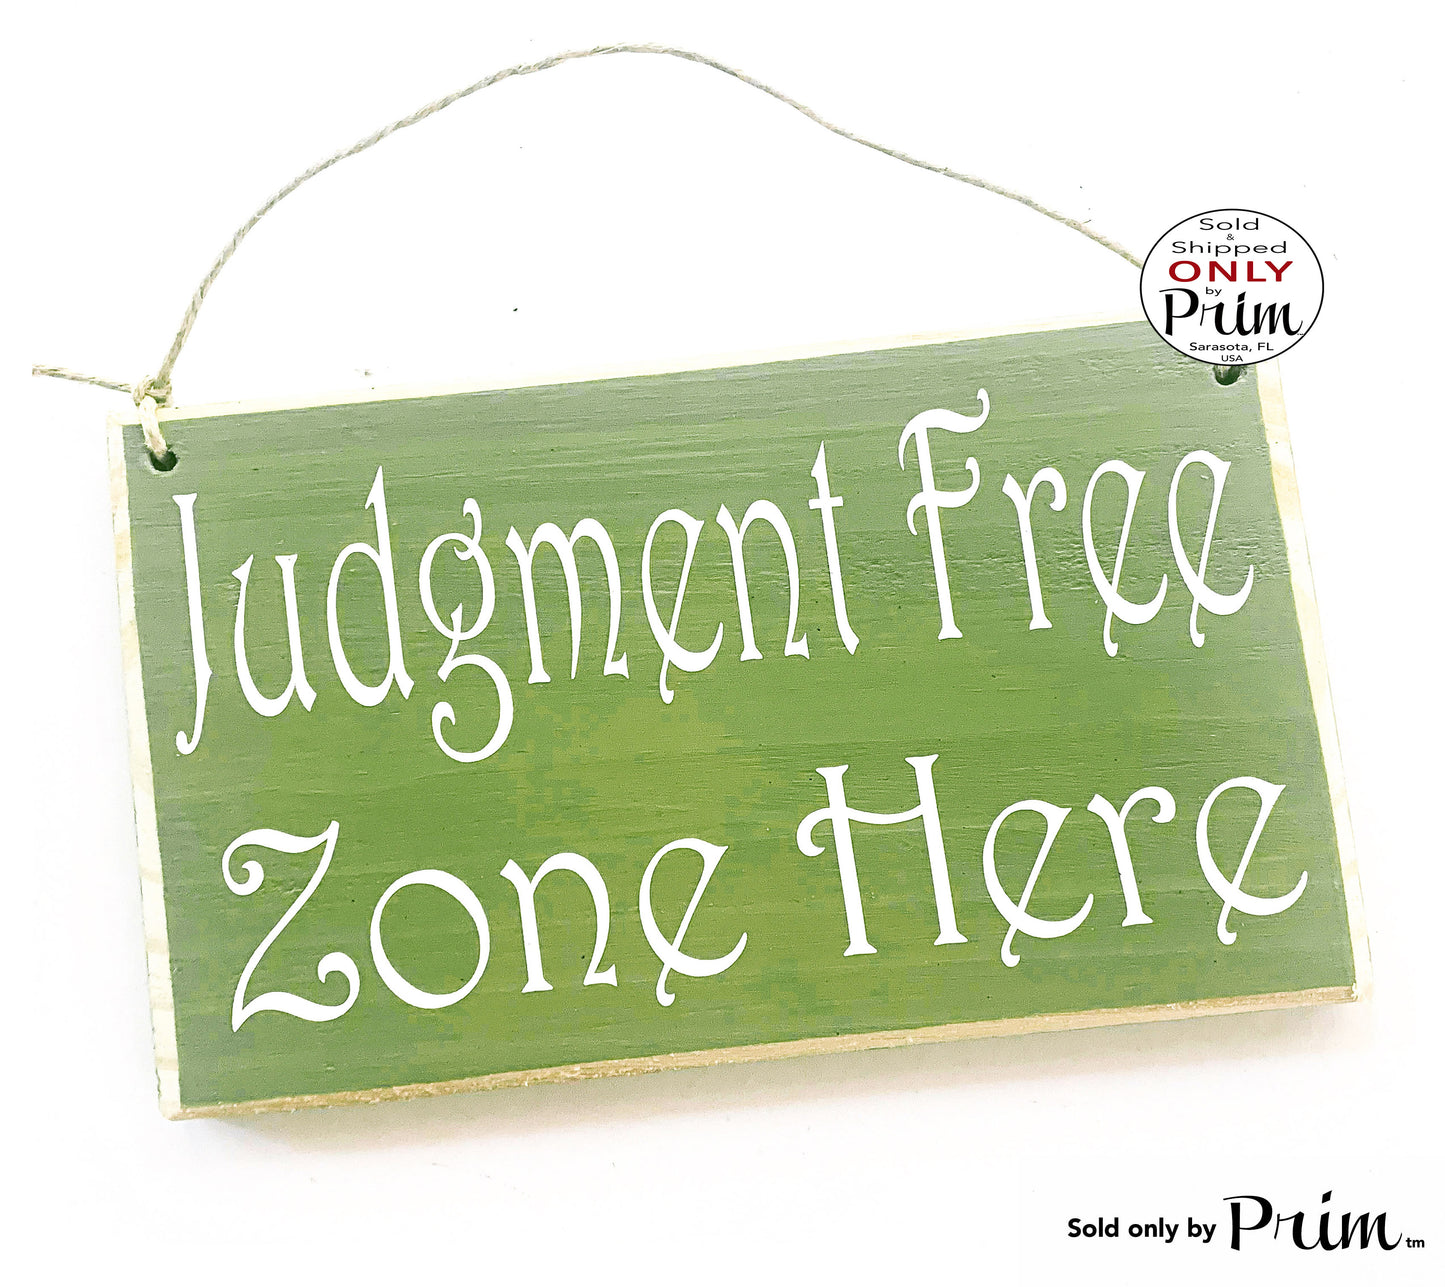 8x6 Judgment Free Zone Here Custom Wood Sign Namaste Drama Please Do Not Disturb Be Nice or Leave Zen Meditation Calm Shhh Quiet No Gossip Designs by Prim